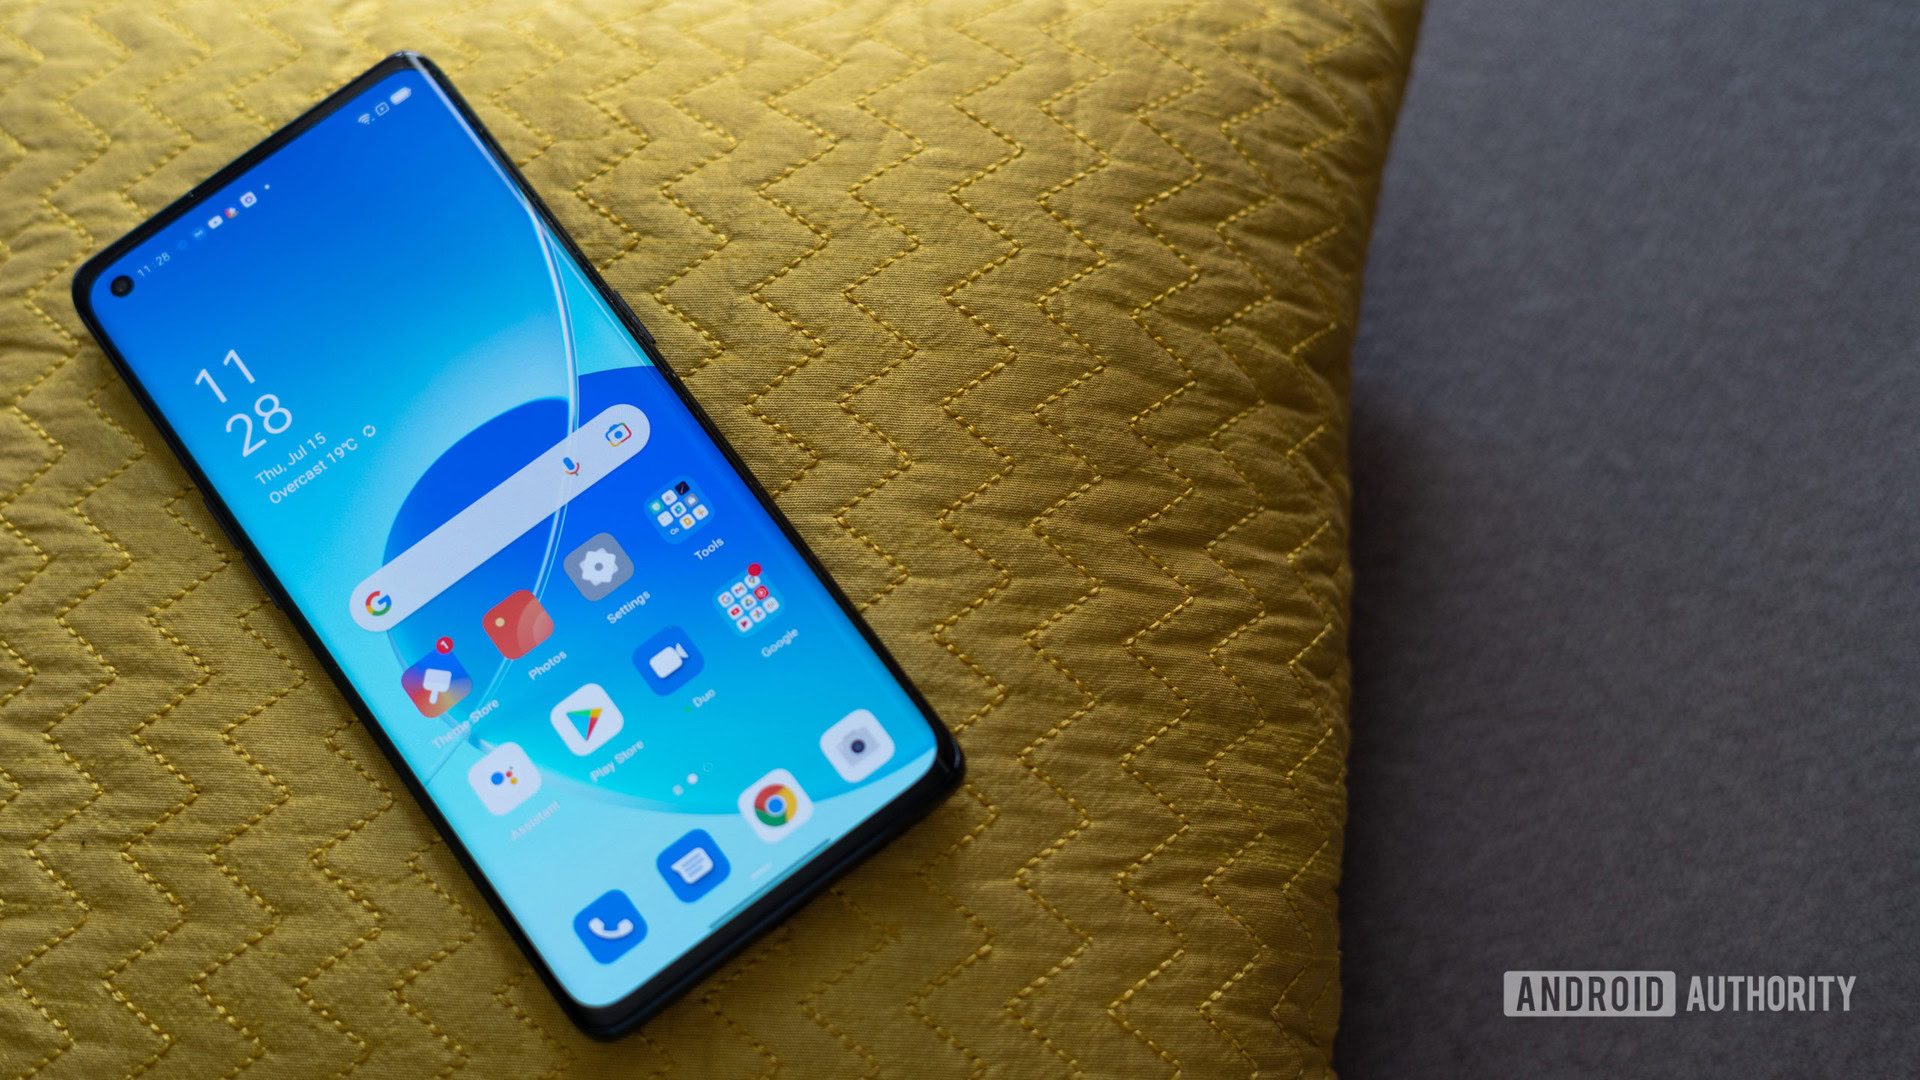 Oppo Reno 6 Pro 5G review in 5 points: Should you buy this Rs 39,990 phone?